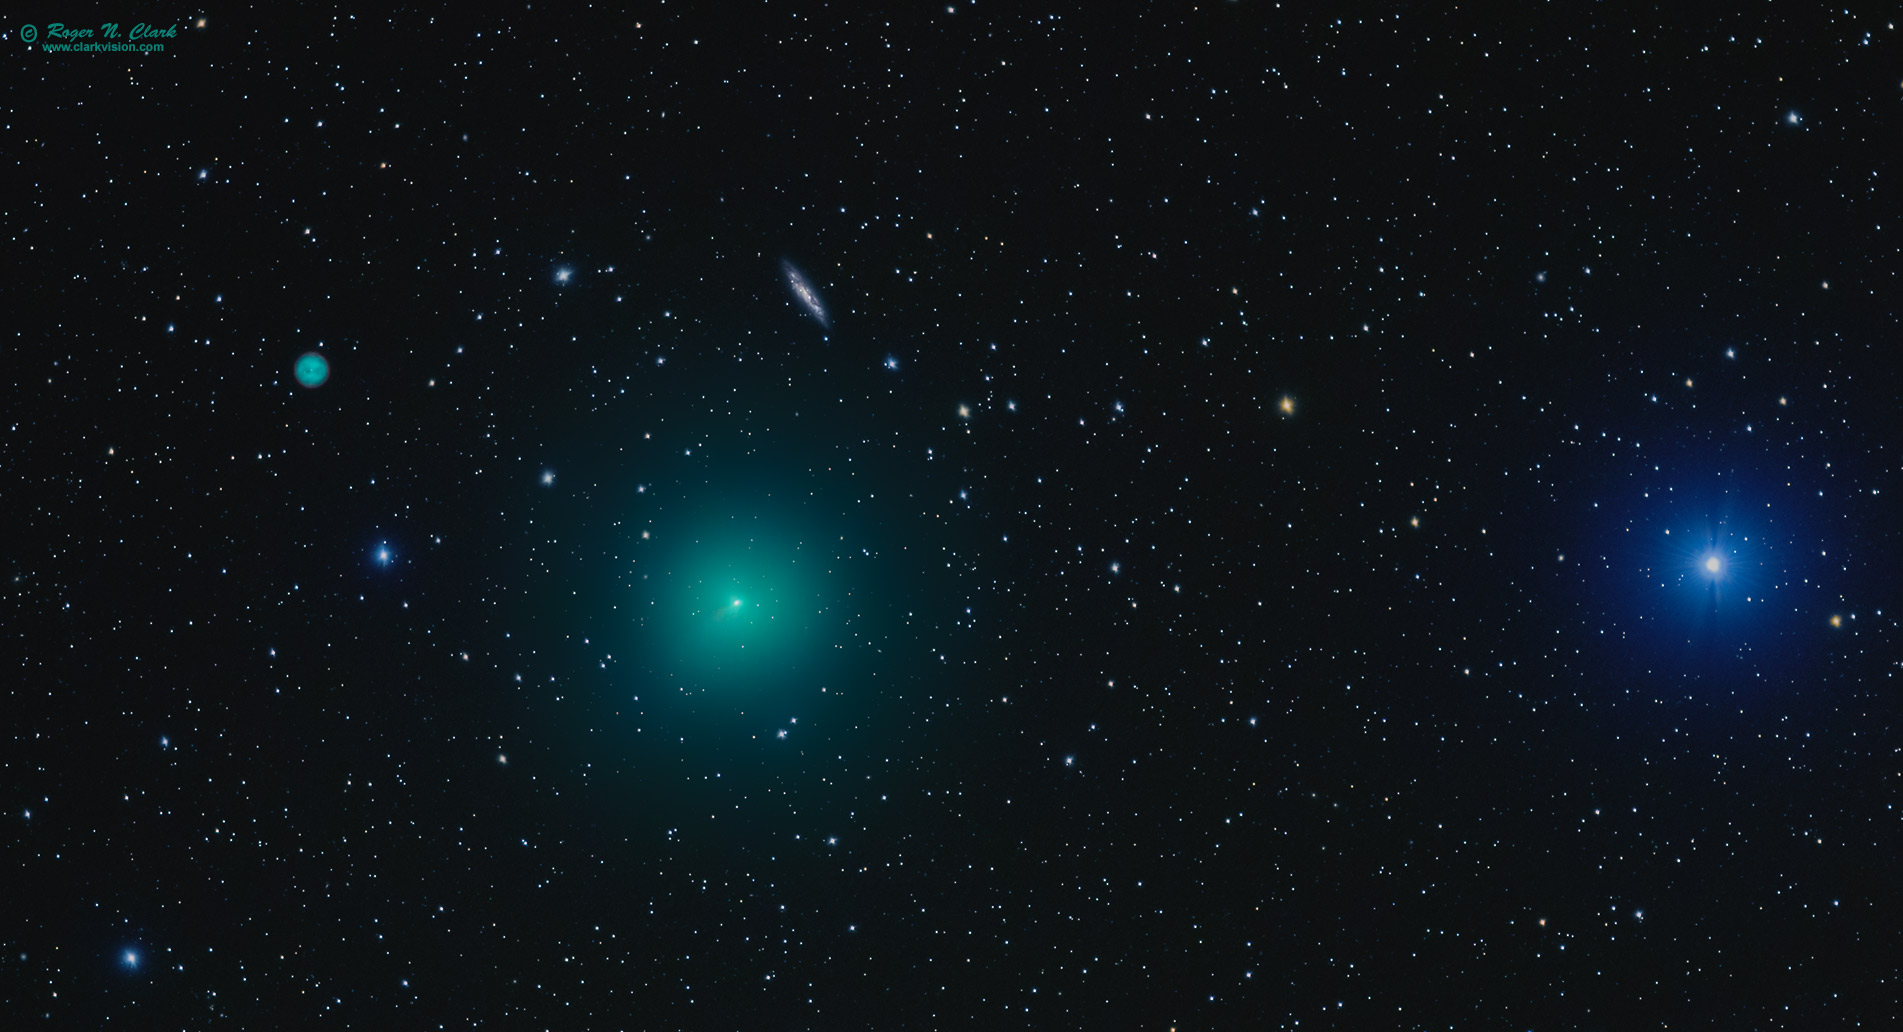 image comet-41p,m97,m108-rnclark-300mm.c03.22.2017.0J6A2432-60.h-0.5x-c1s.jpg is Copyrighted by Roger N. Clark, www.clarkvision.com